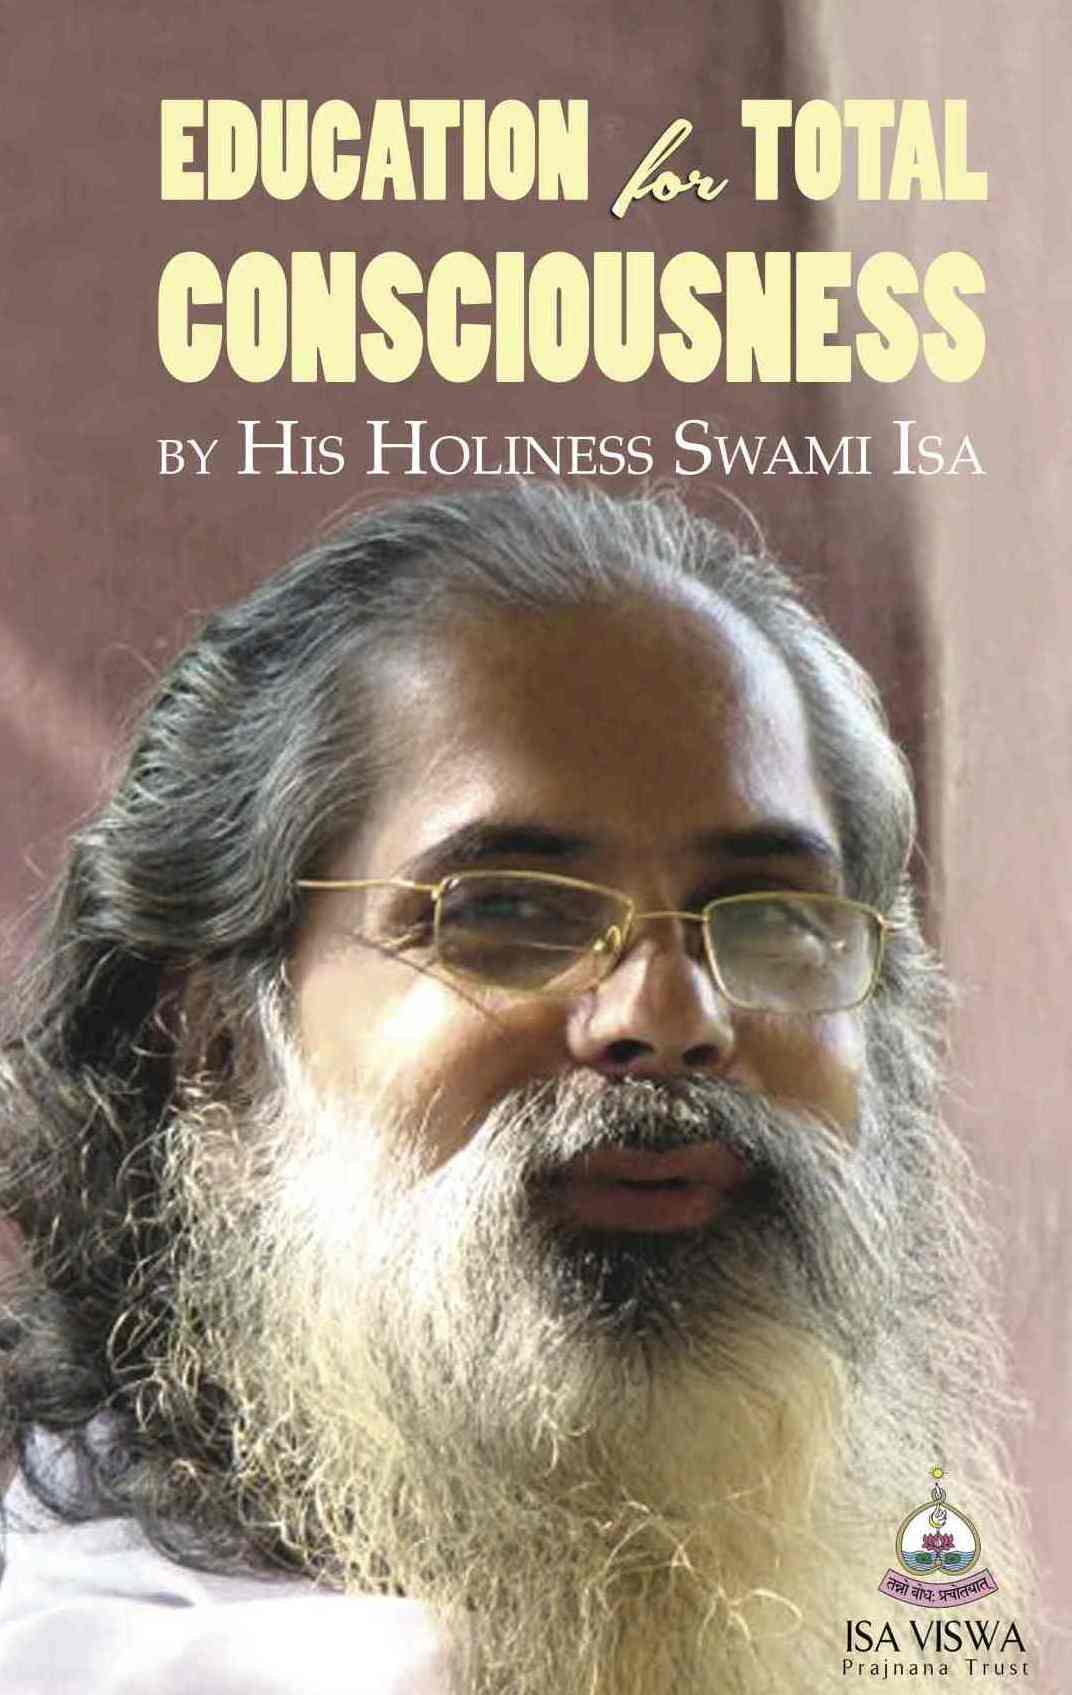 Education for Total Consciousness book